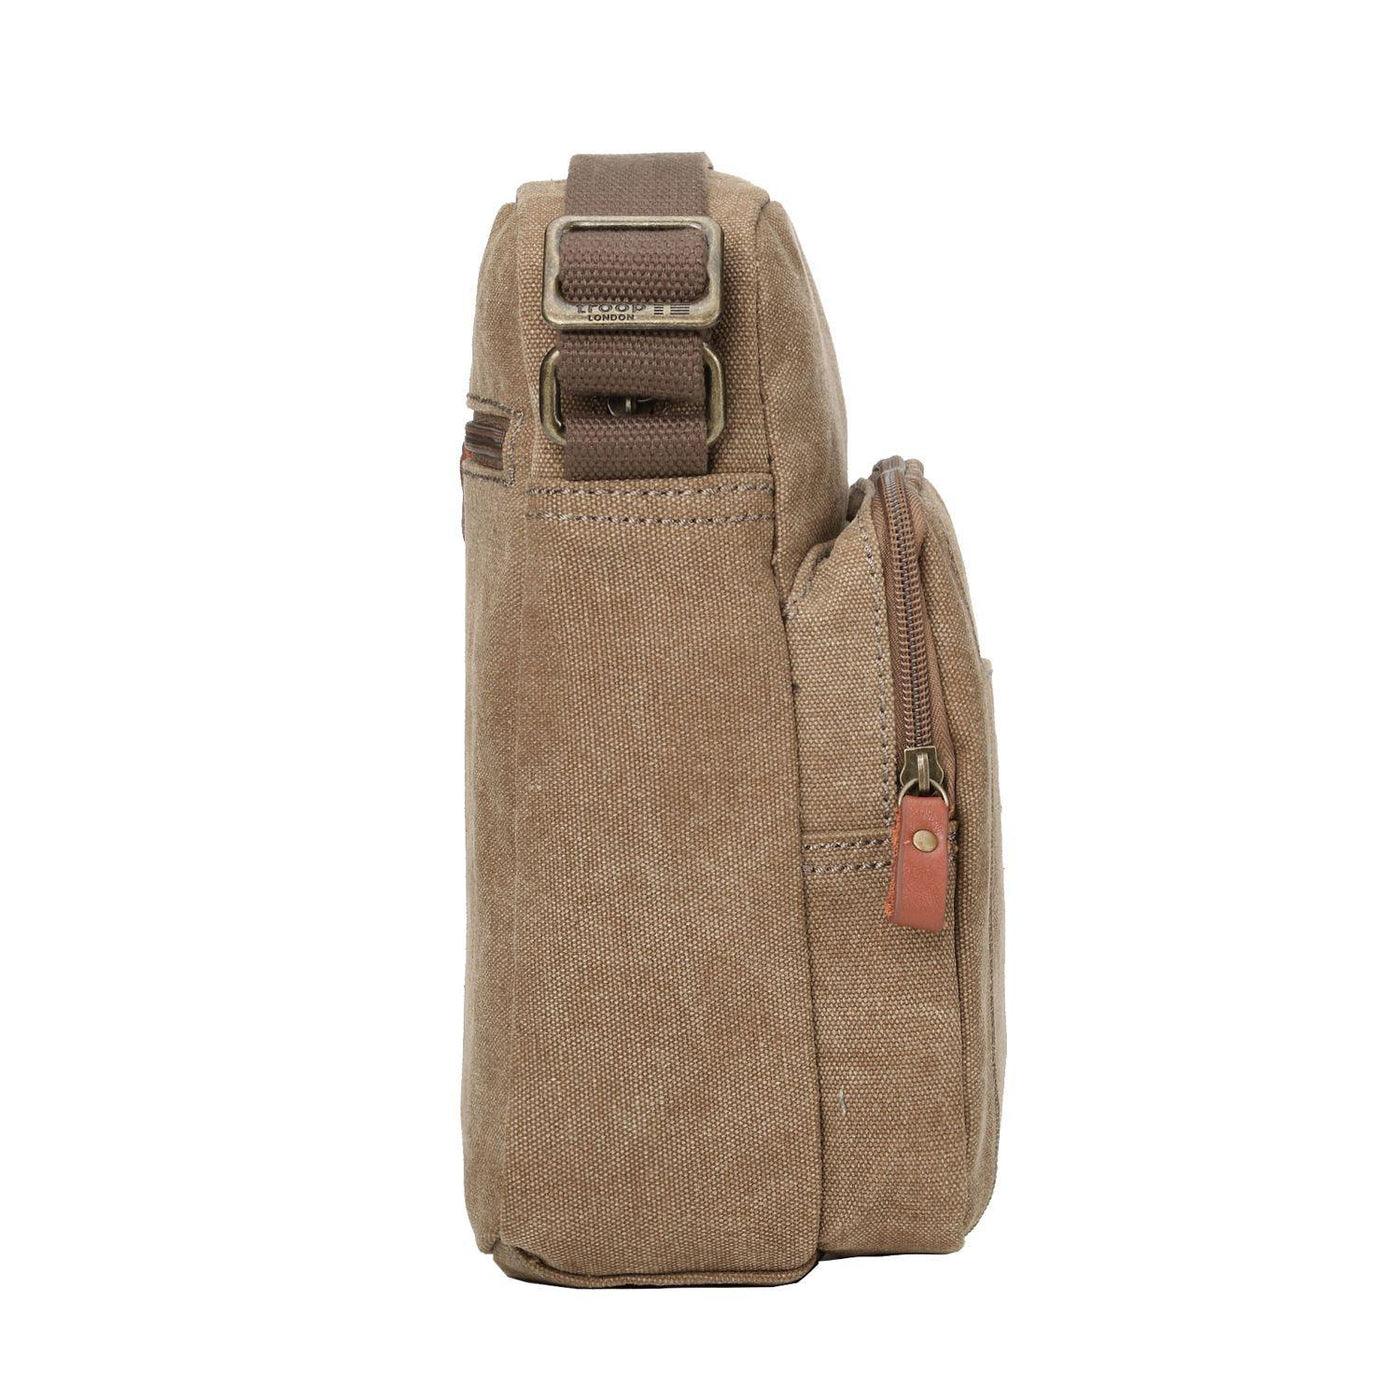 CLASSIC CANVAS ACROSS BODY BAG - TRP0370 - BROWN - RUTHERFORD & Co